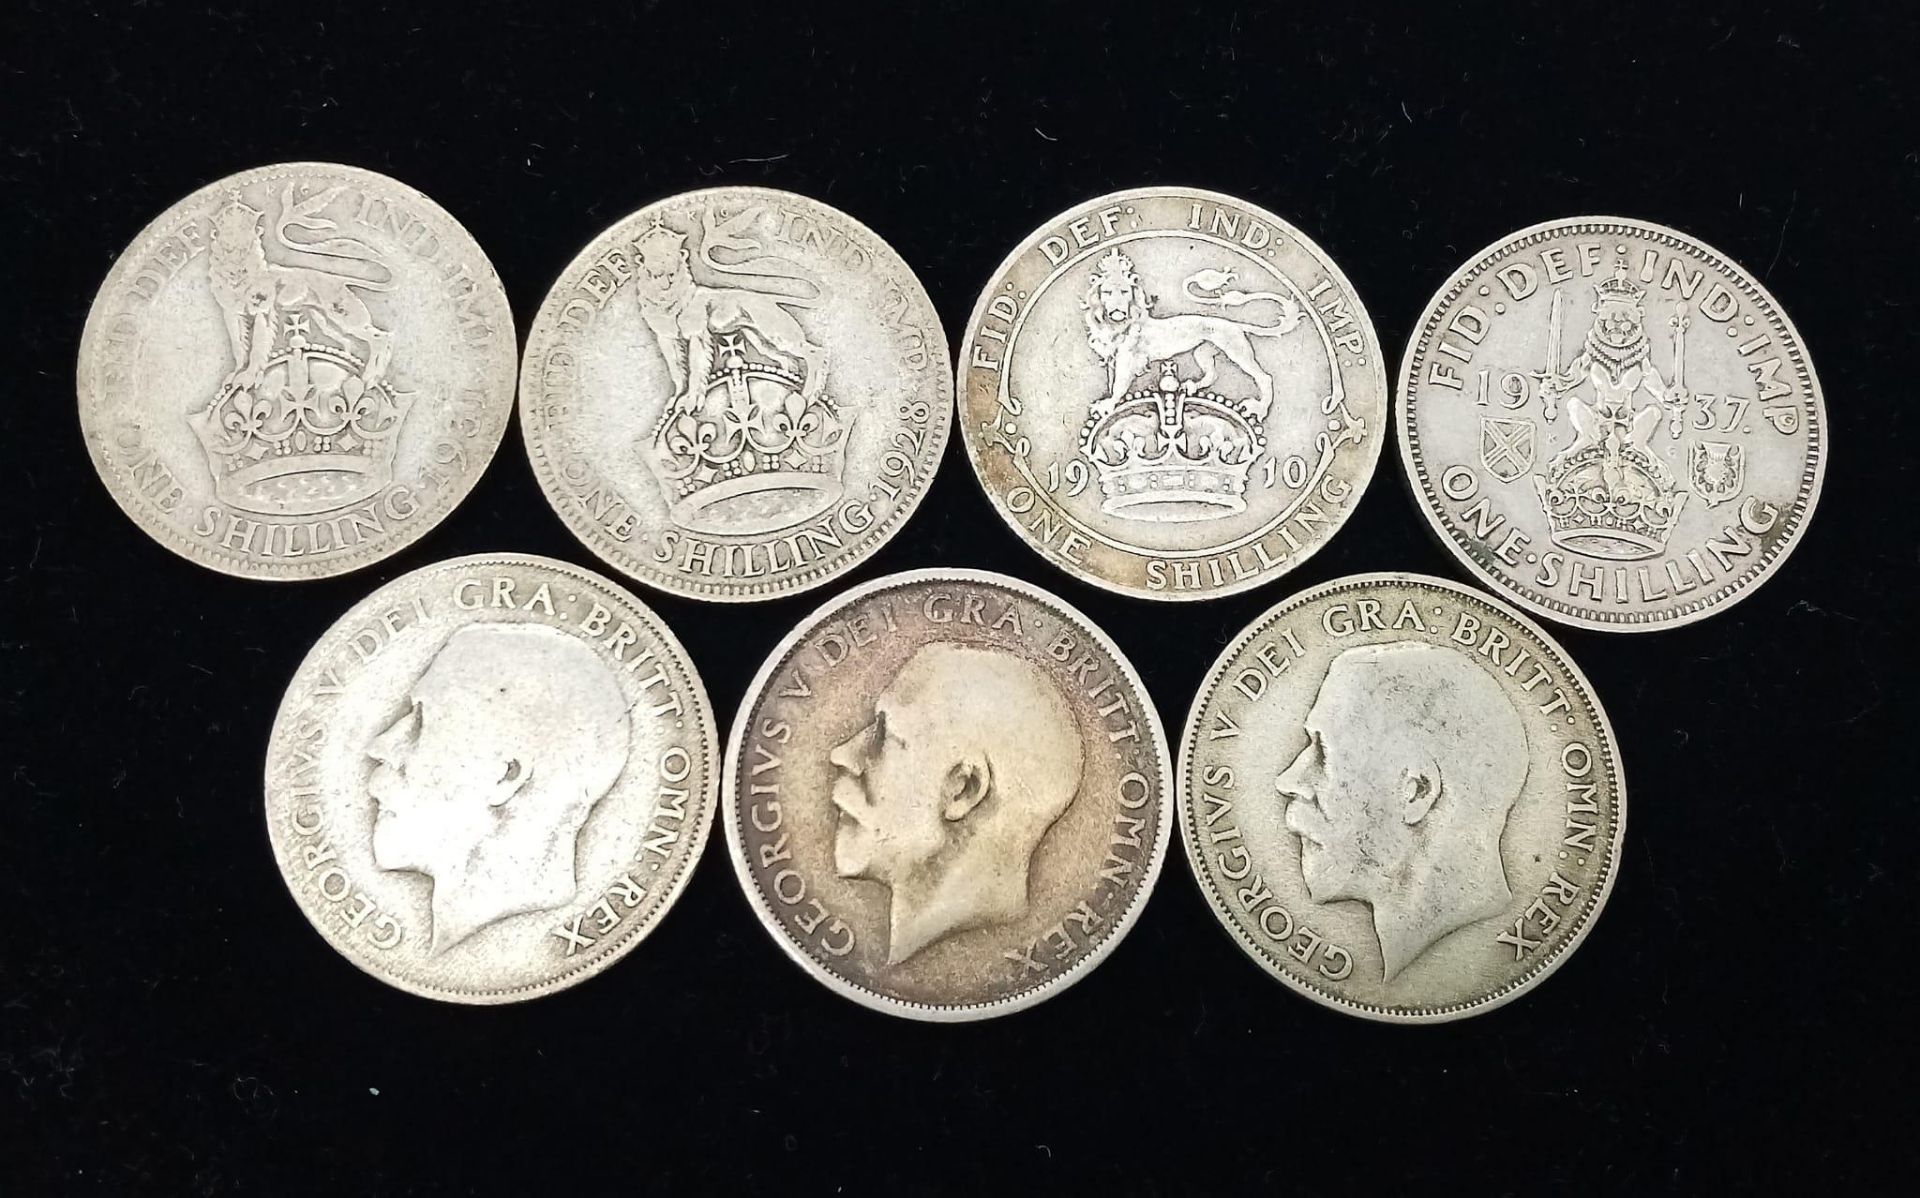 41 Pre 1947 British Silver Shilling Coins. 222g total weight. Please see photos for finer details. - Bild 3 aus 3